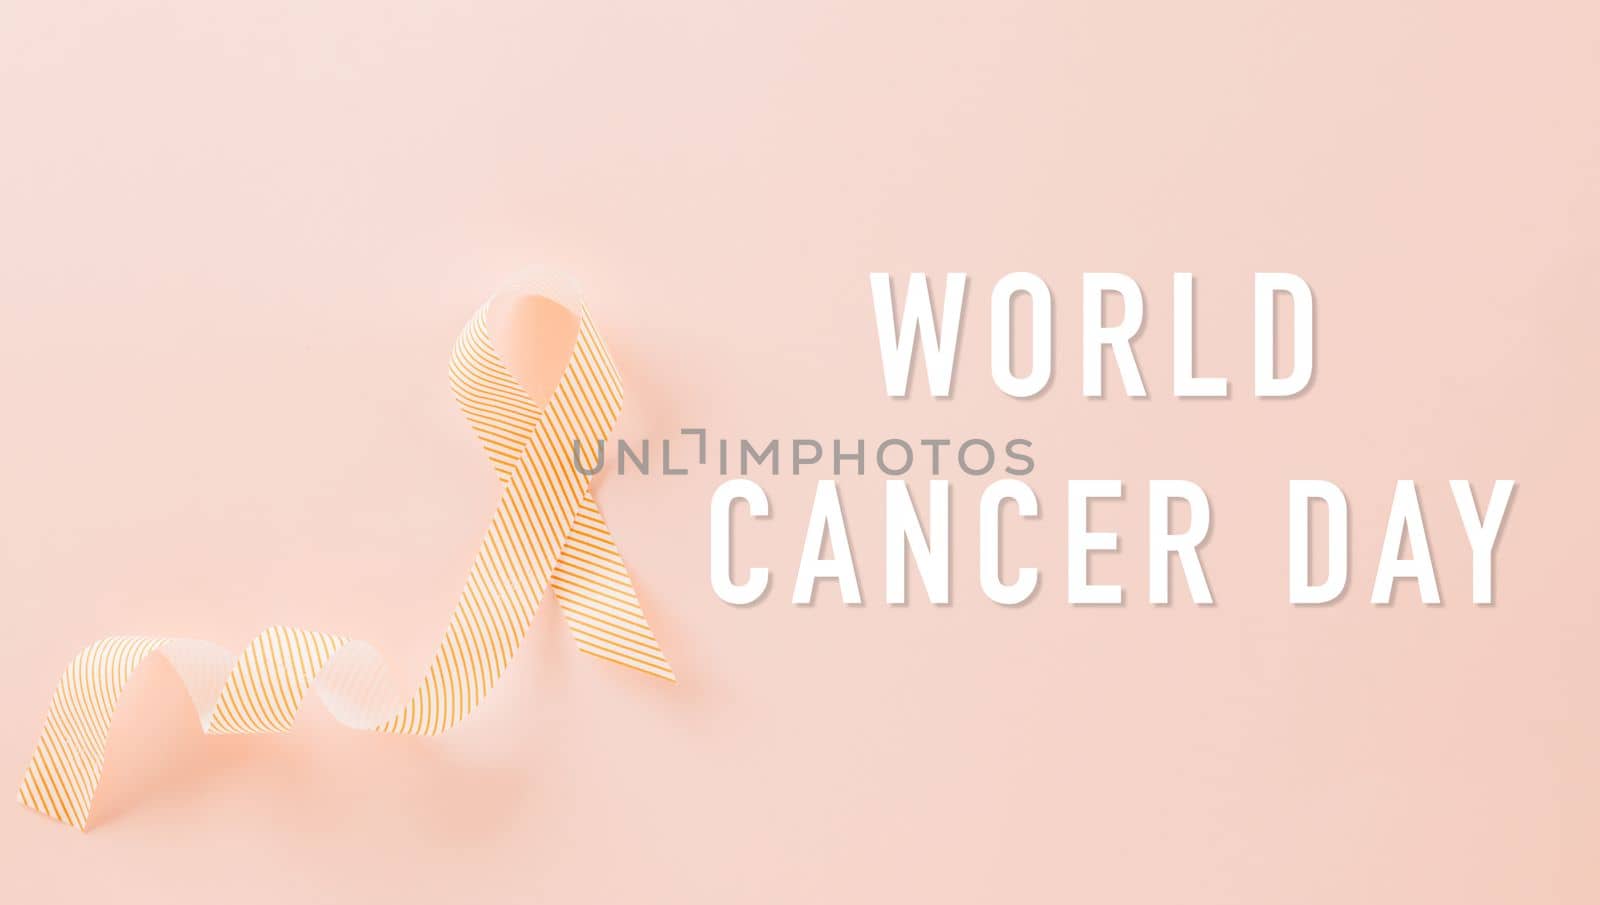 World cancer day concept by Sorapop